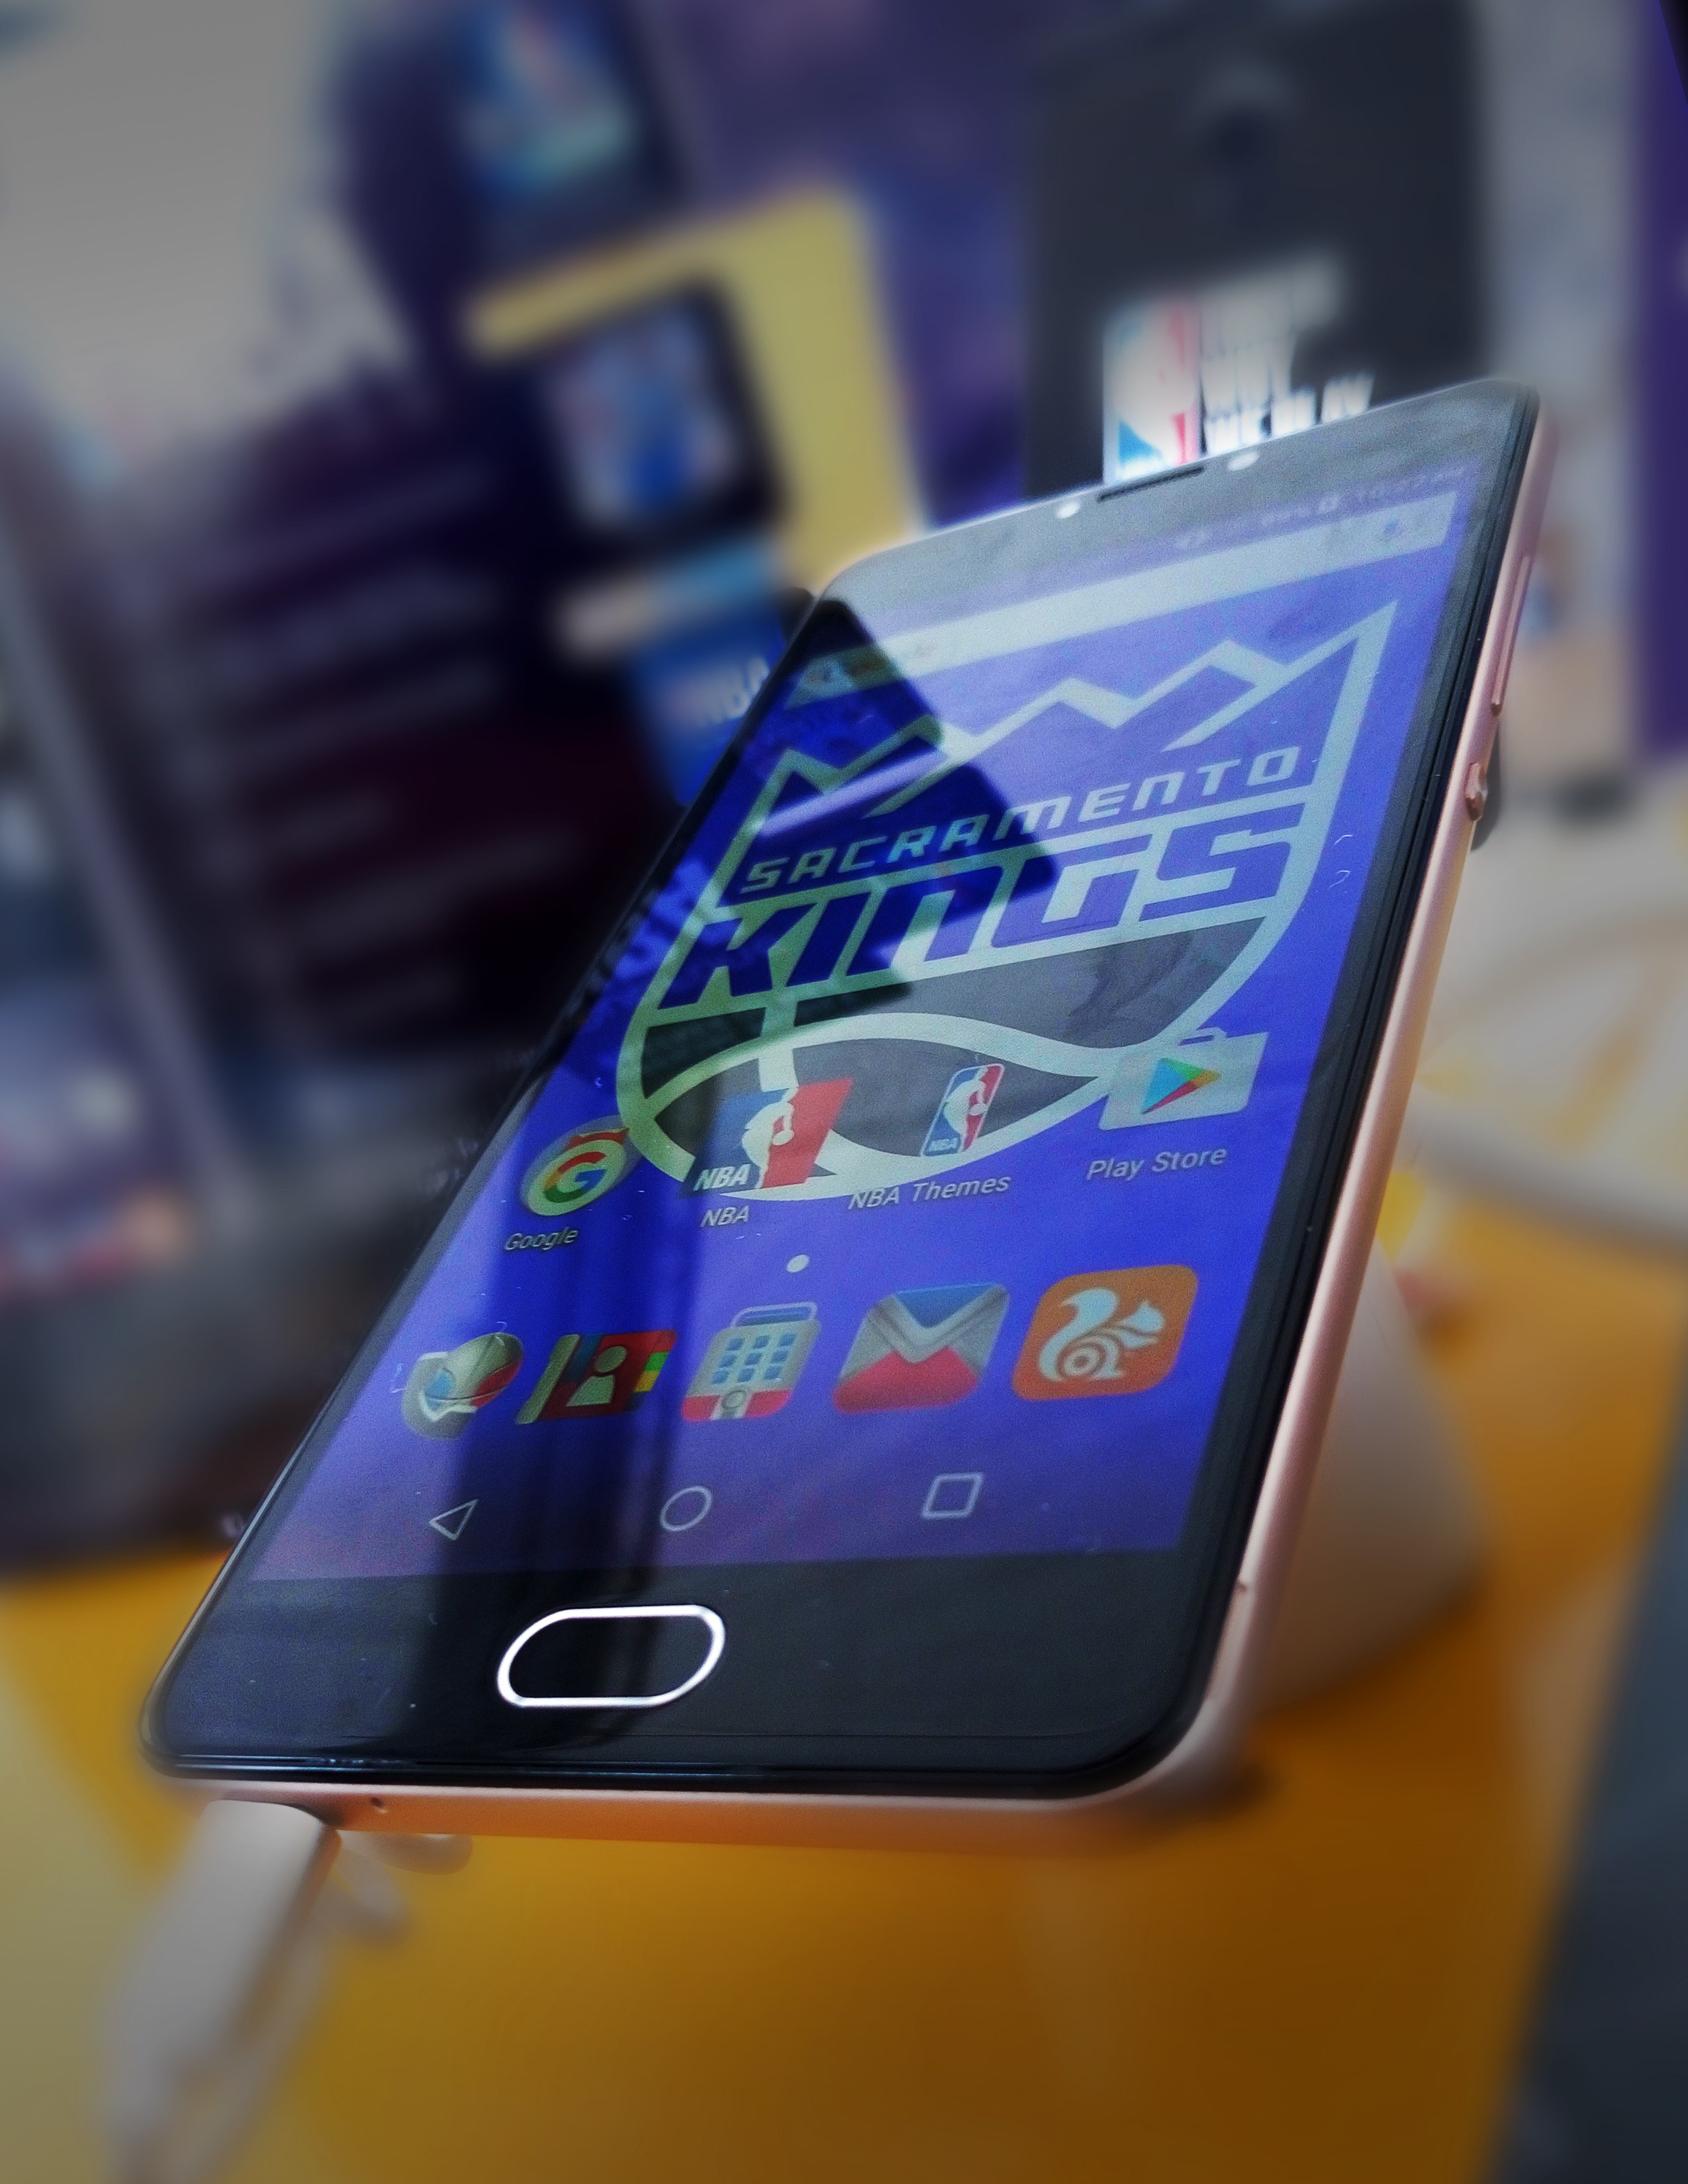 Cloudfone Introduces The 1st Nba Themed Android Phone - Nba Cloudfone , HD Wallpaper & Backgrounds